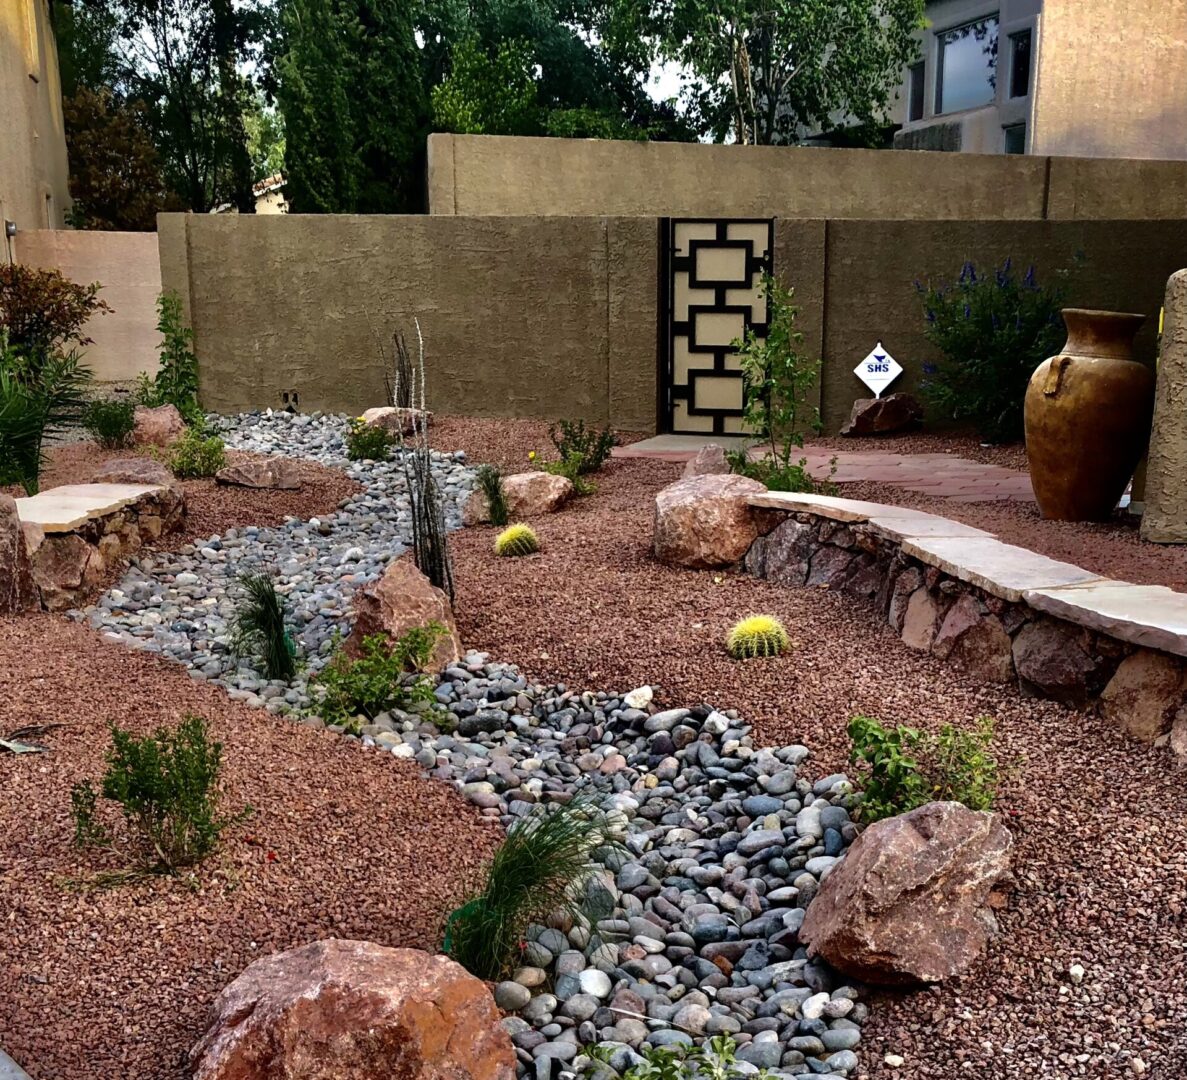 A garden with rocks and plants in it